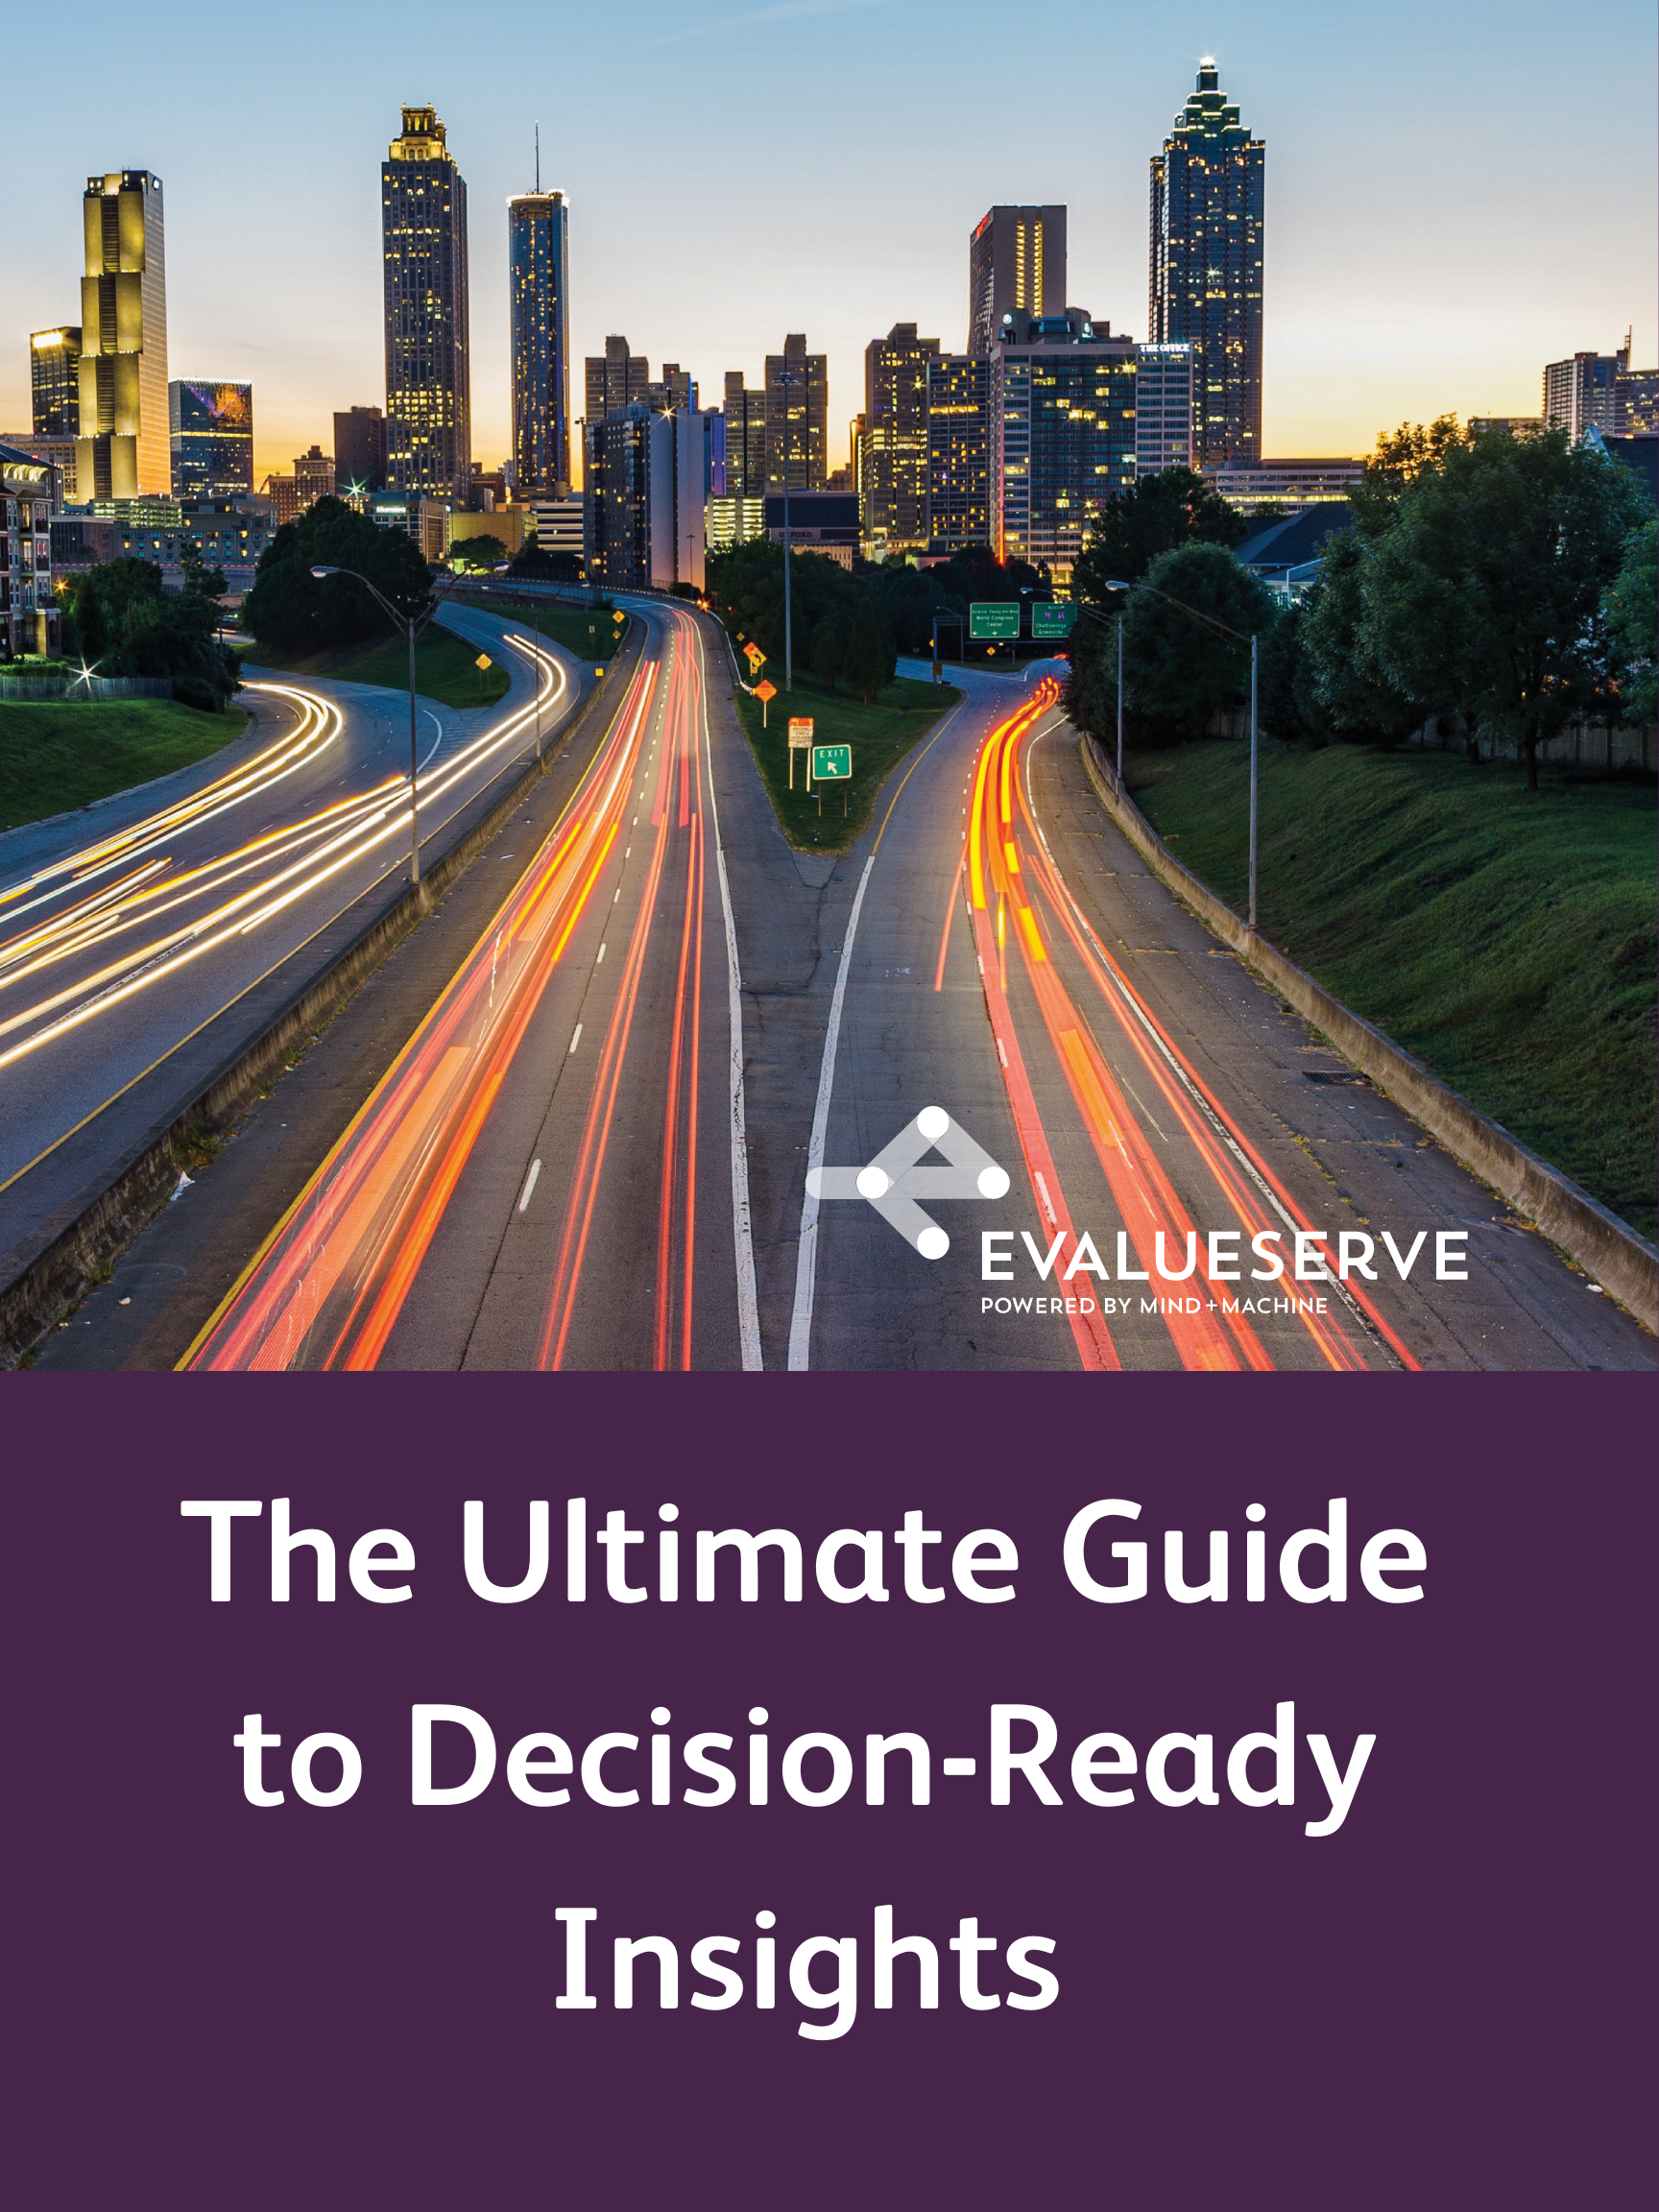 _The Ultimate Guide to Decision-Ready Insights (2)